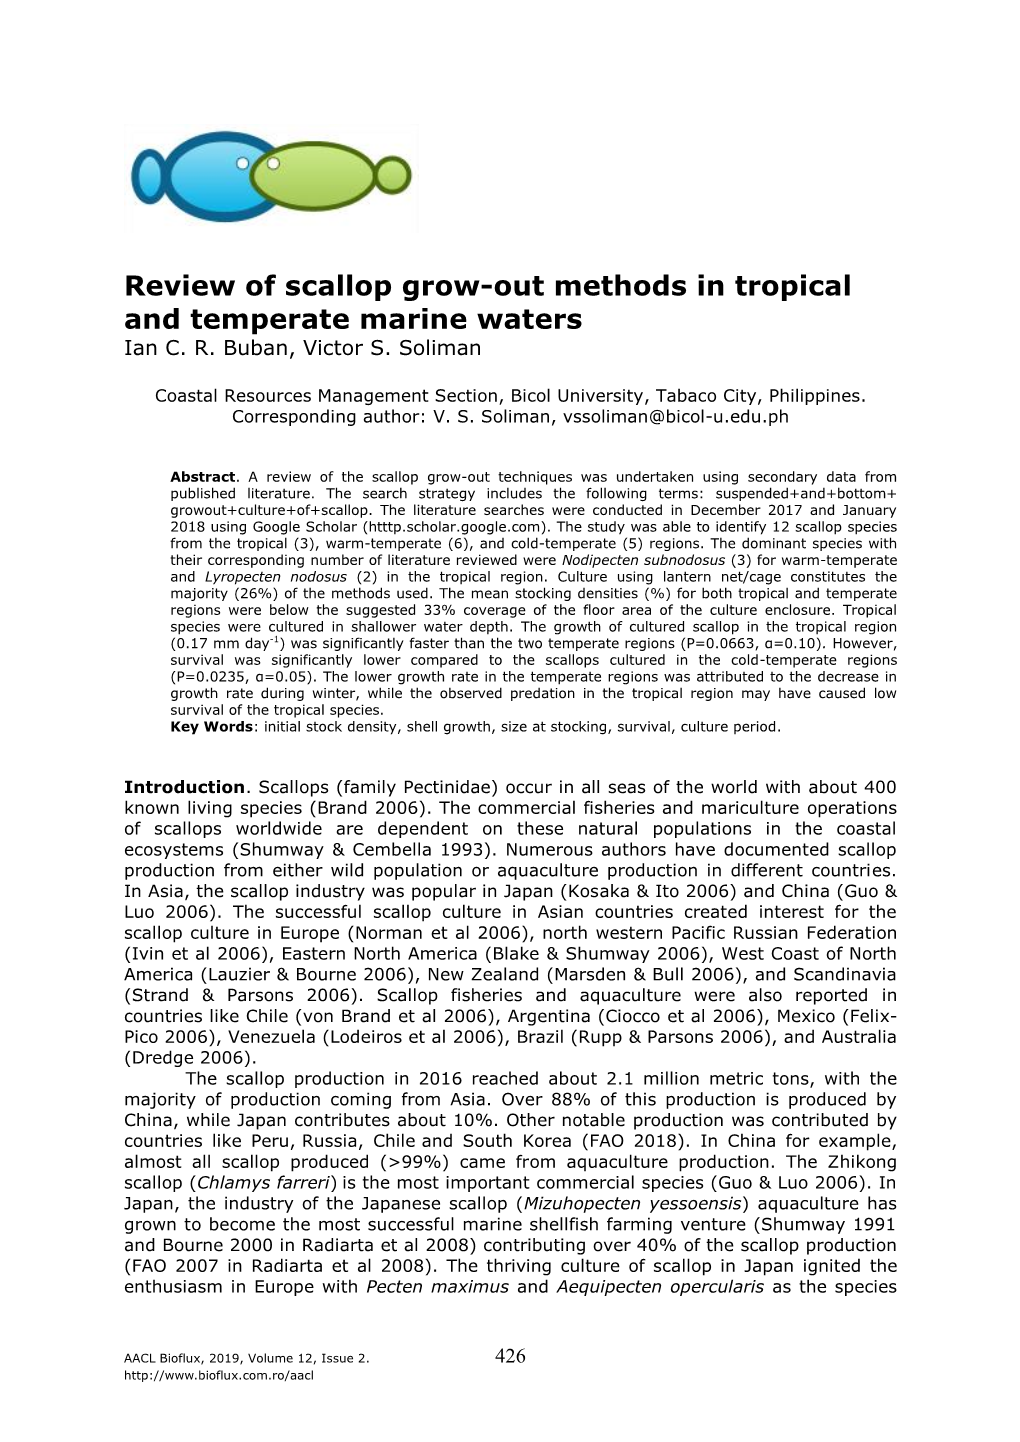 Review of Scallop Grow-Out Methods in Tropical and Temperate Marine Waters Ian C